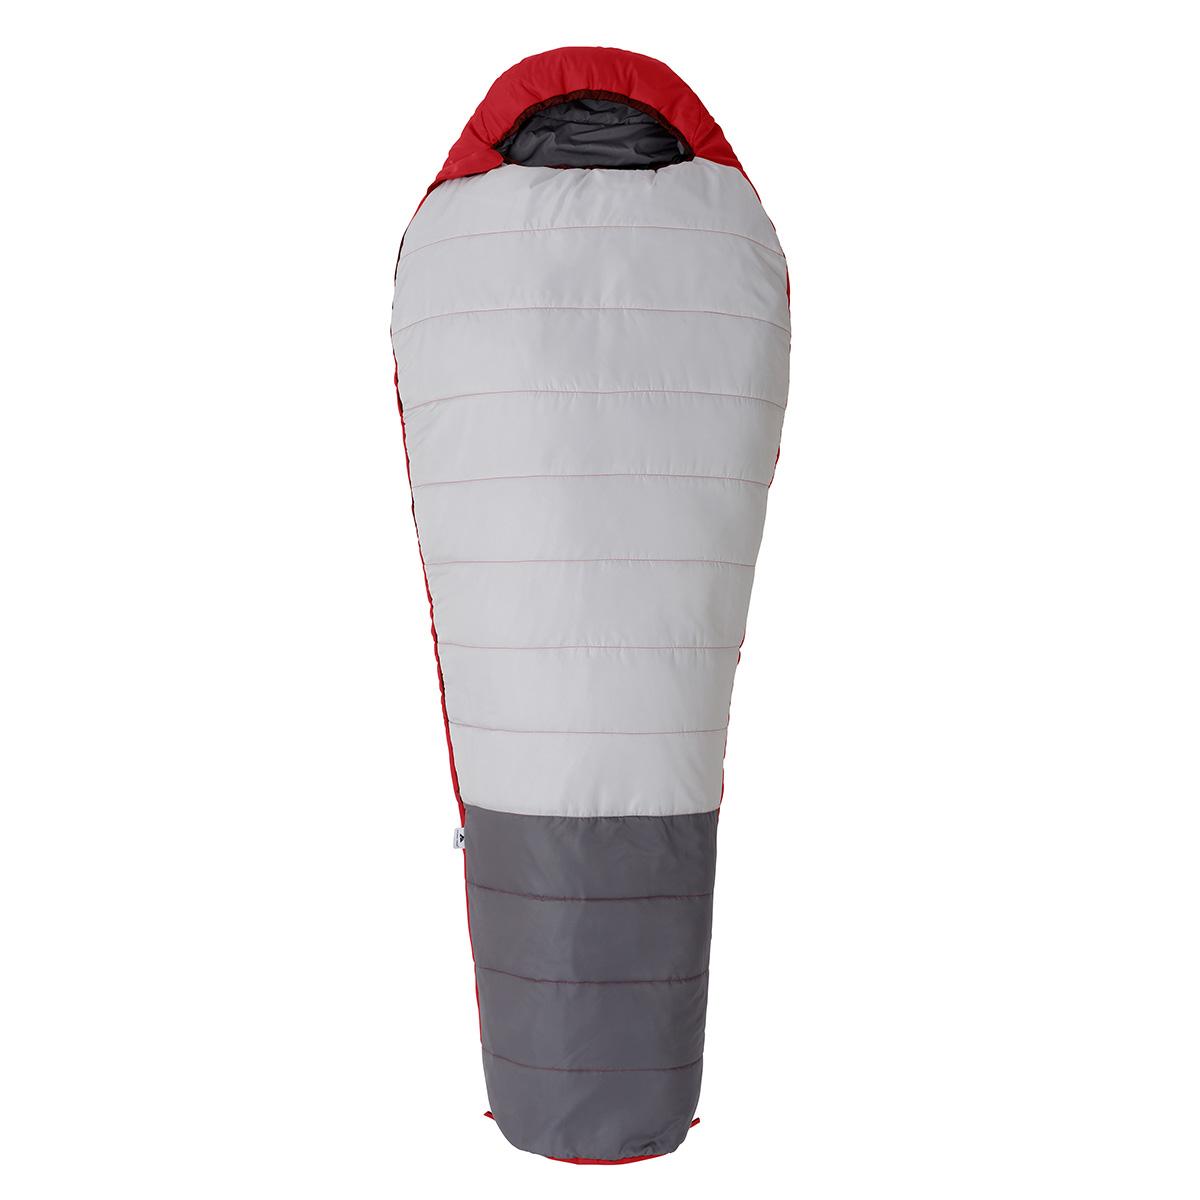 Ozark Trail Himont 40F Climatech Mummy Sleeping Bag for $20.97